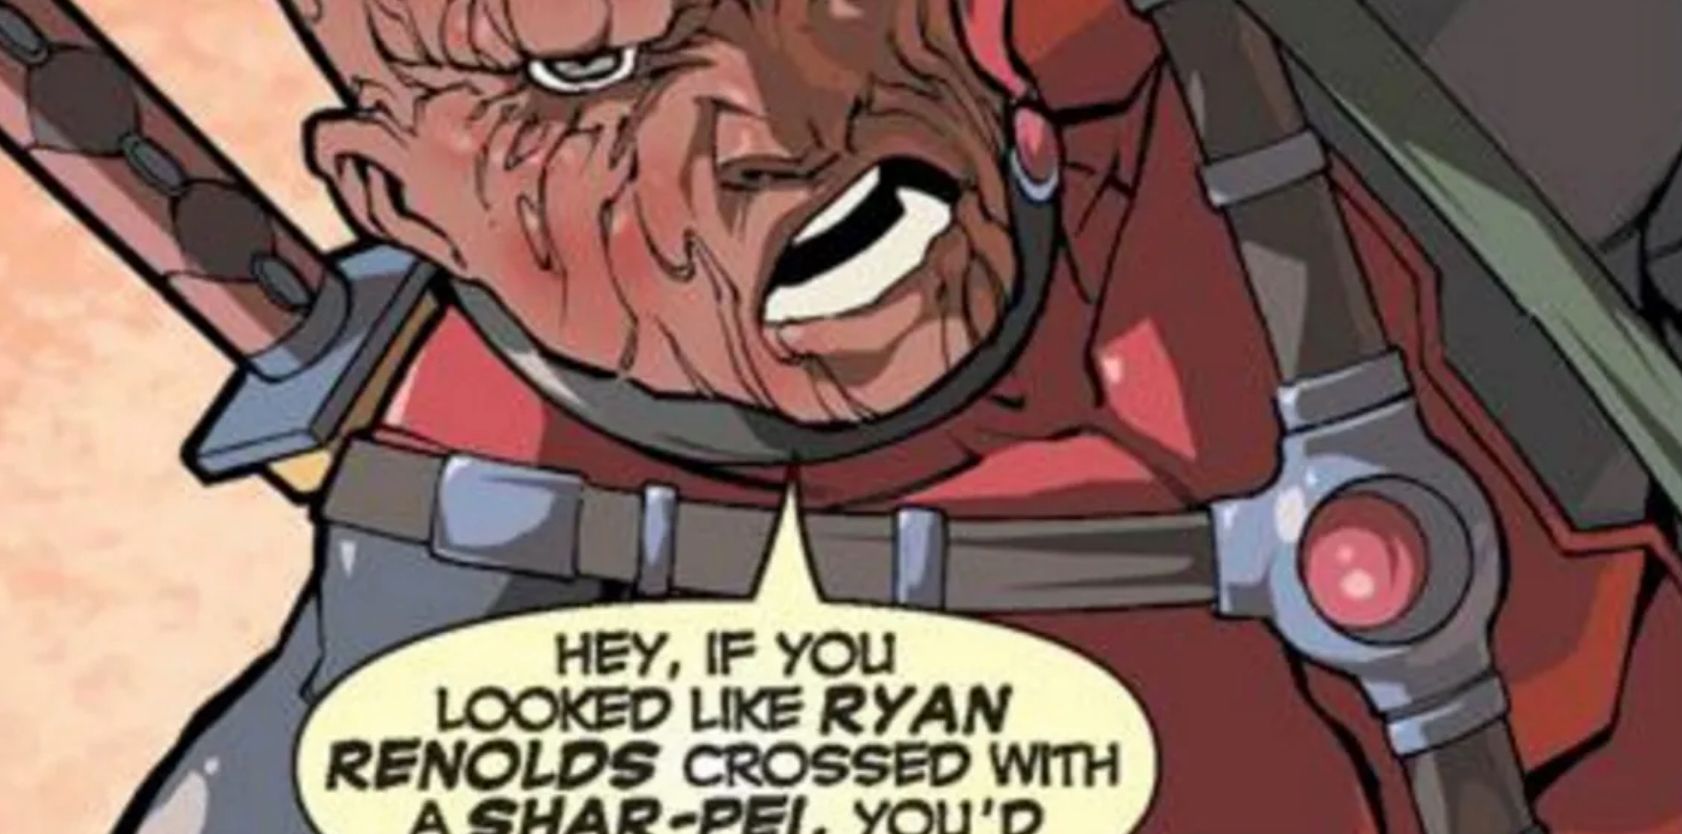 A 2004 Deadpool comic gives Ryan Reynolds a shout out